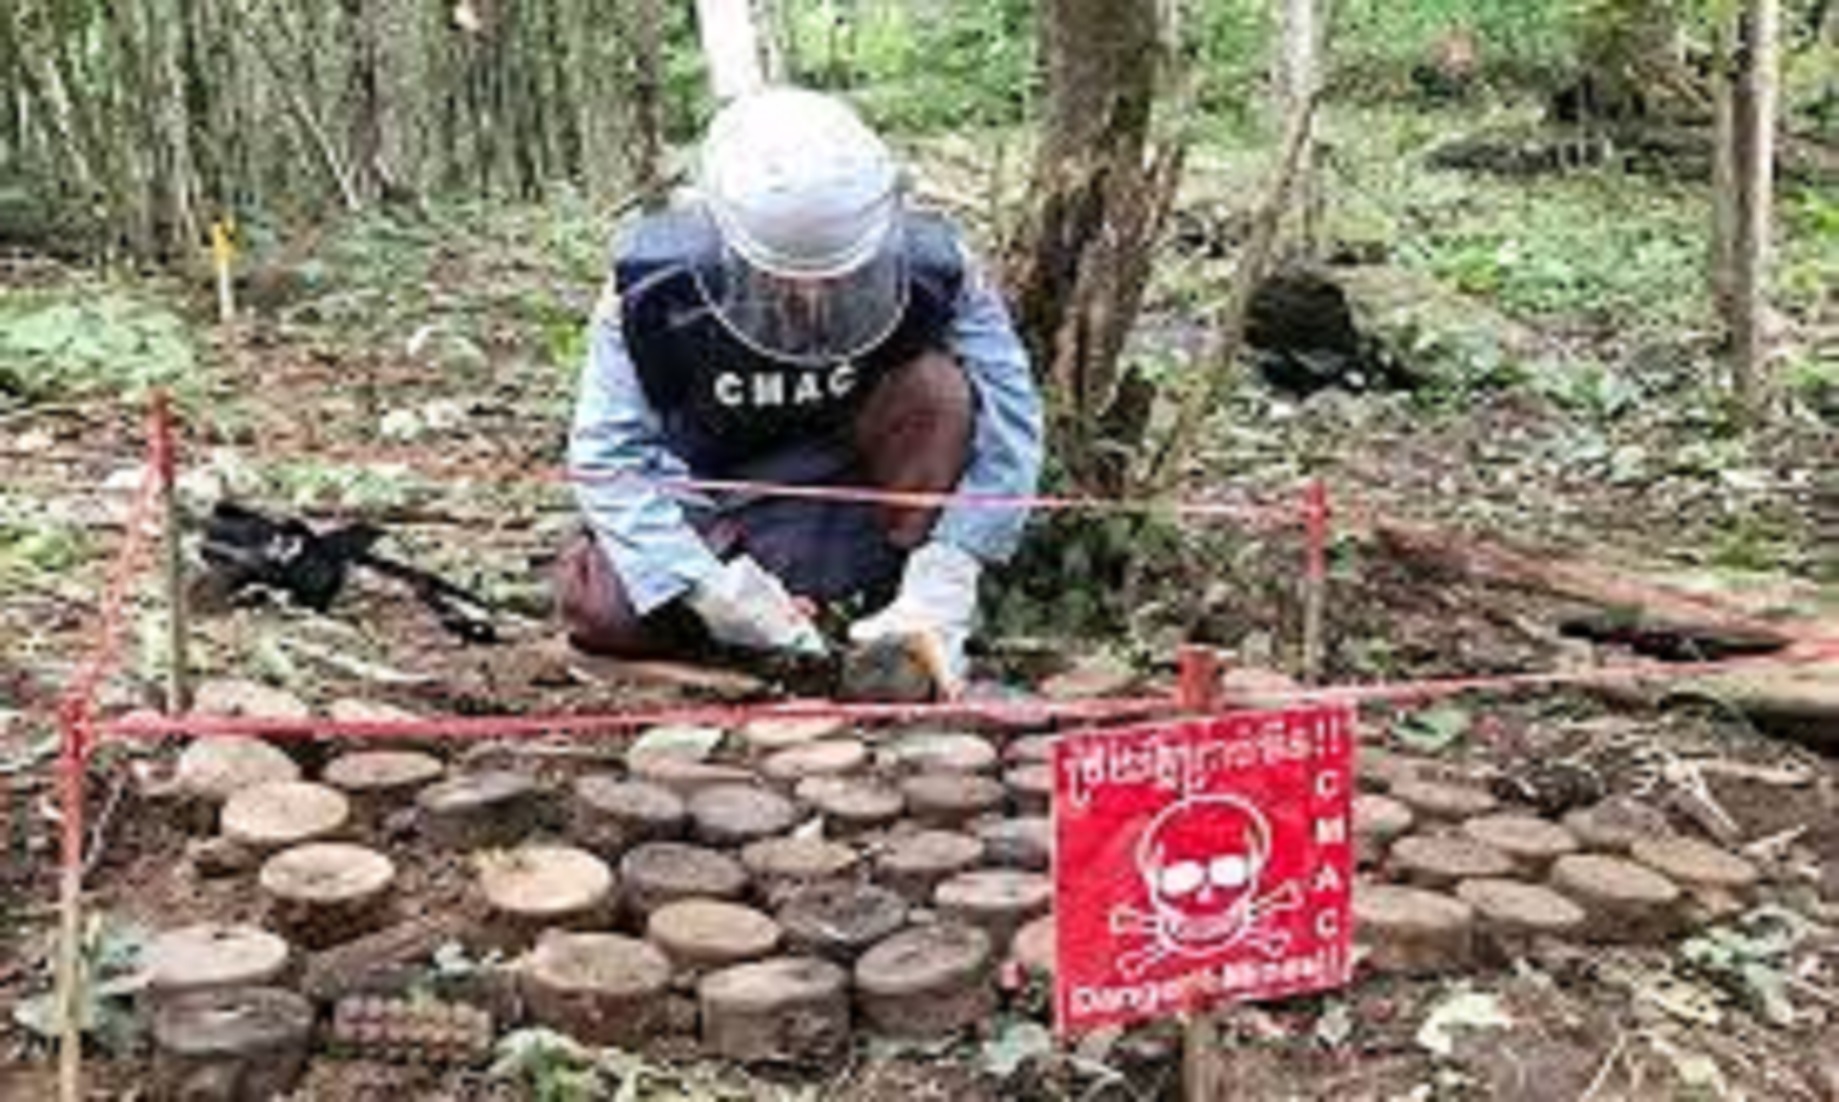 UNDP Praised Cambodia For Appealing Donations For Landmine Clearance